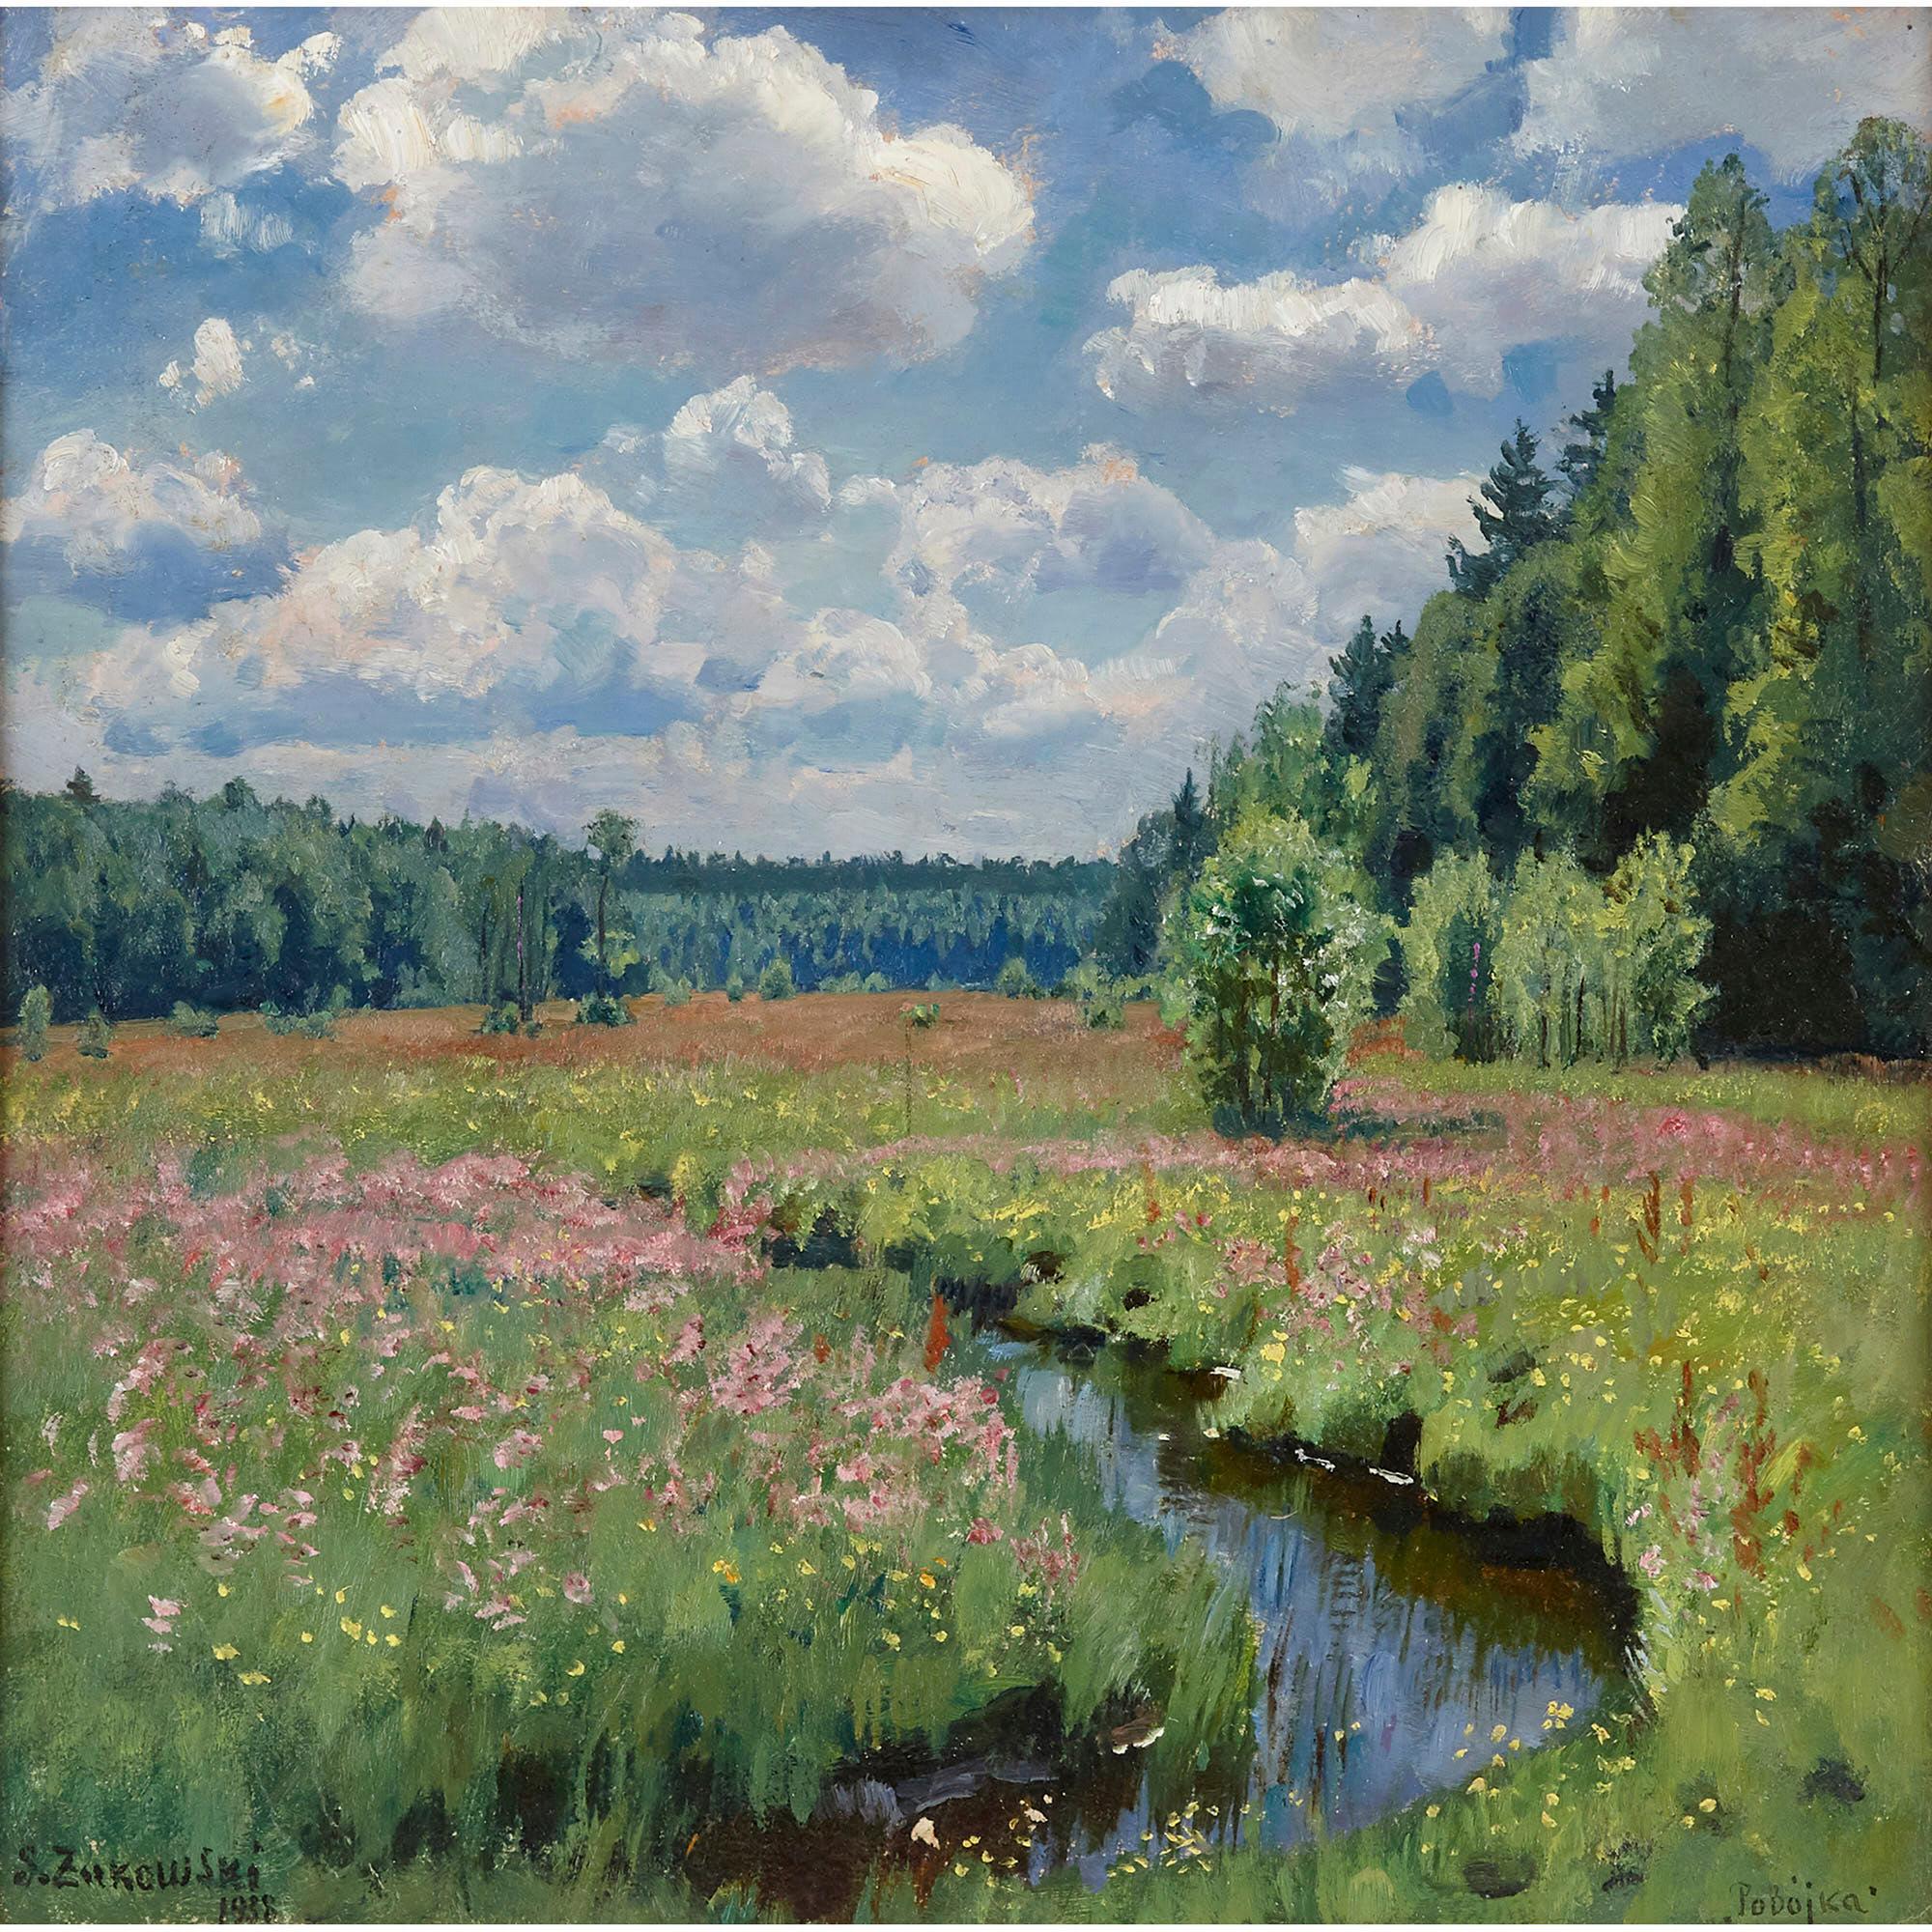 Russian Impressionist painting of a meadow by Zhukovsky - Painting by Stanislav Yulianovich Zhukovsky